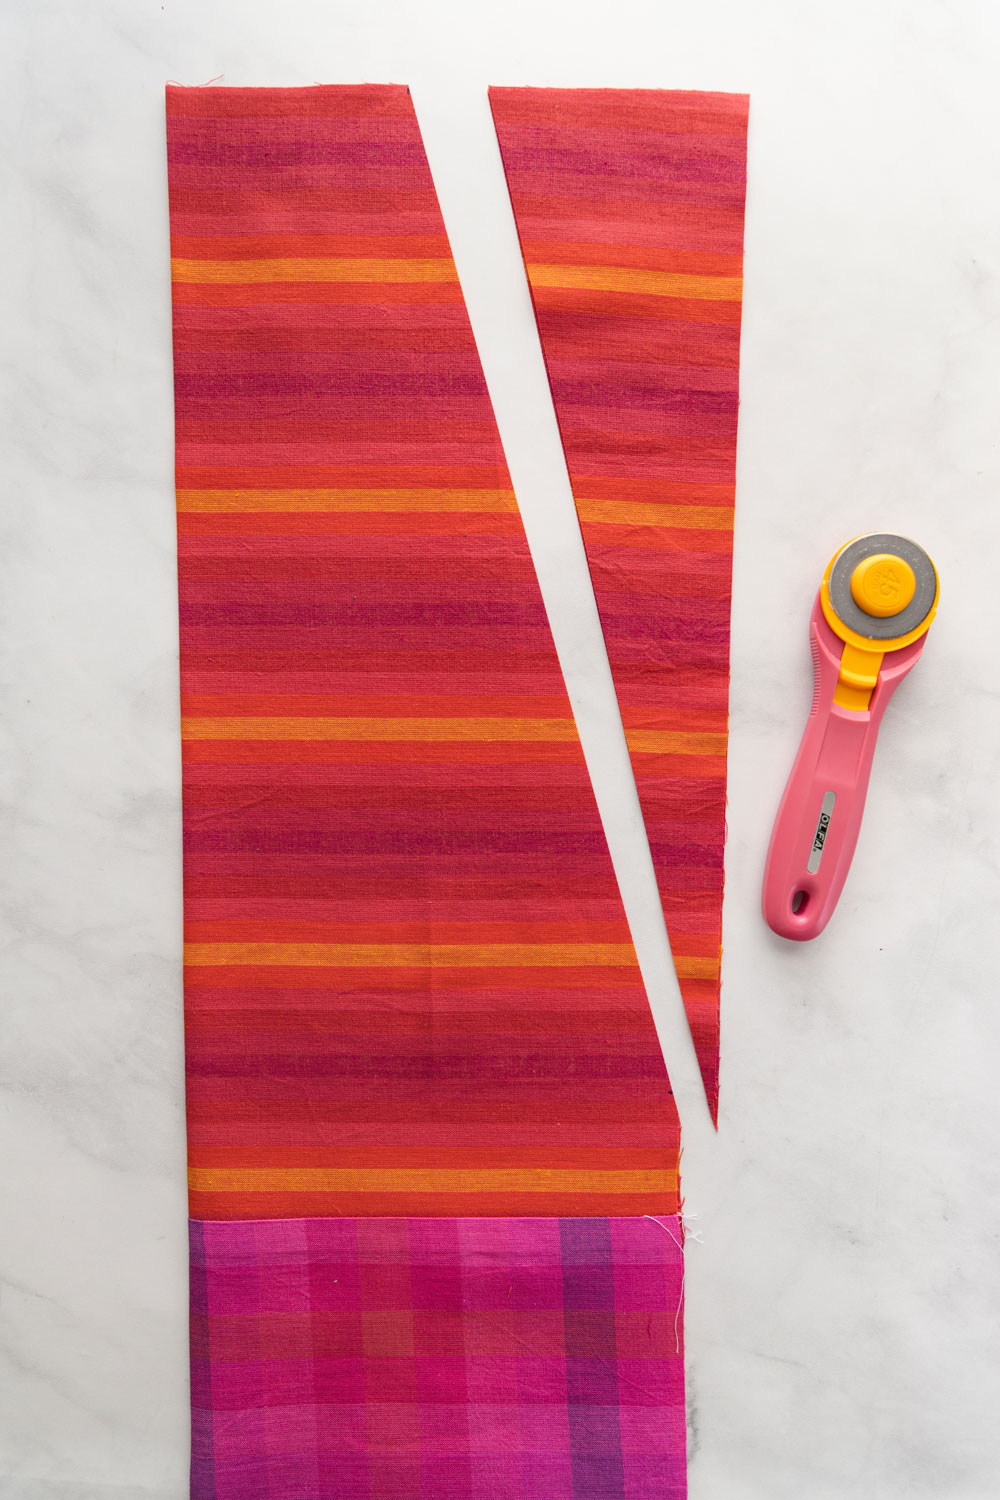 In this free reusable market bag tutorial you only need basic sewing skills and 4 fat quarters of fabric. This sewing DIY is great for kids too! suzyquilts.com #DIYbag #beginnersewing #fatquarterpattern